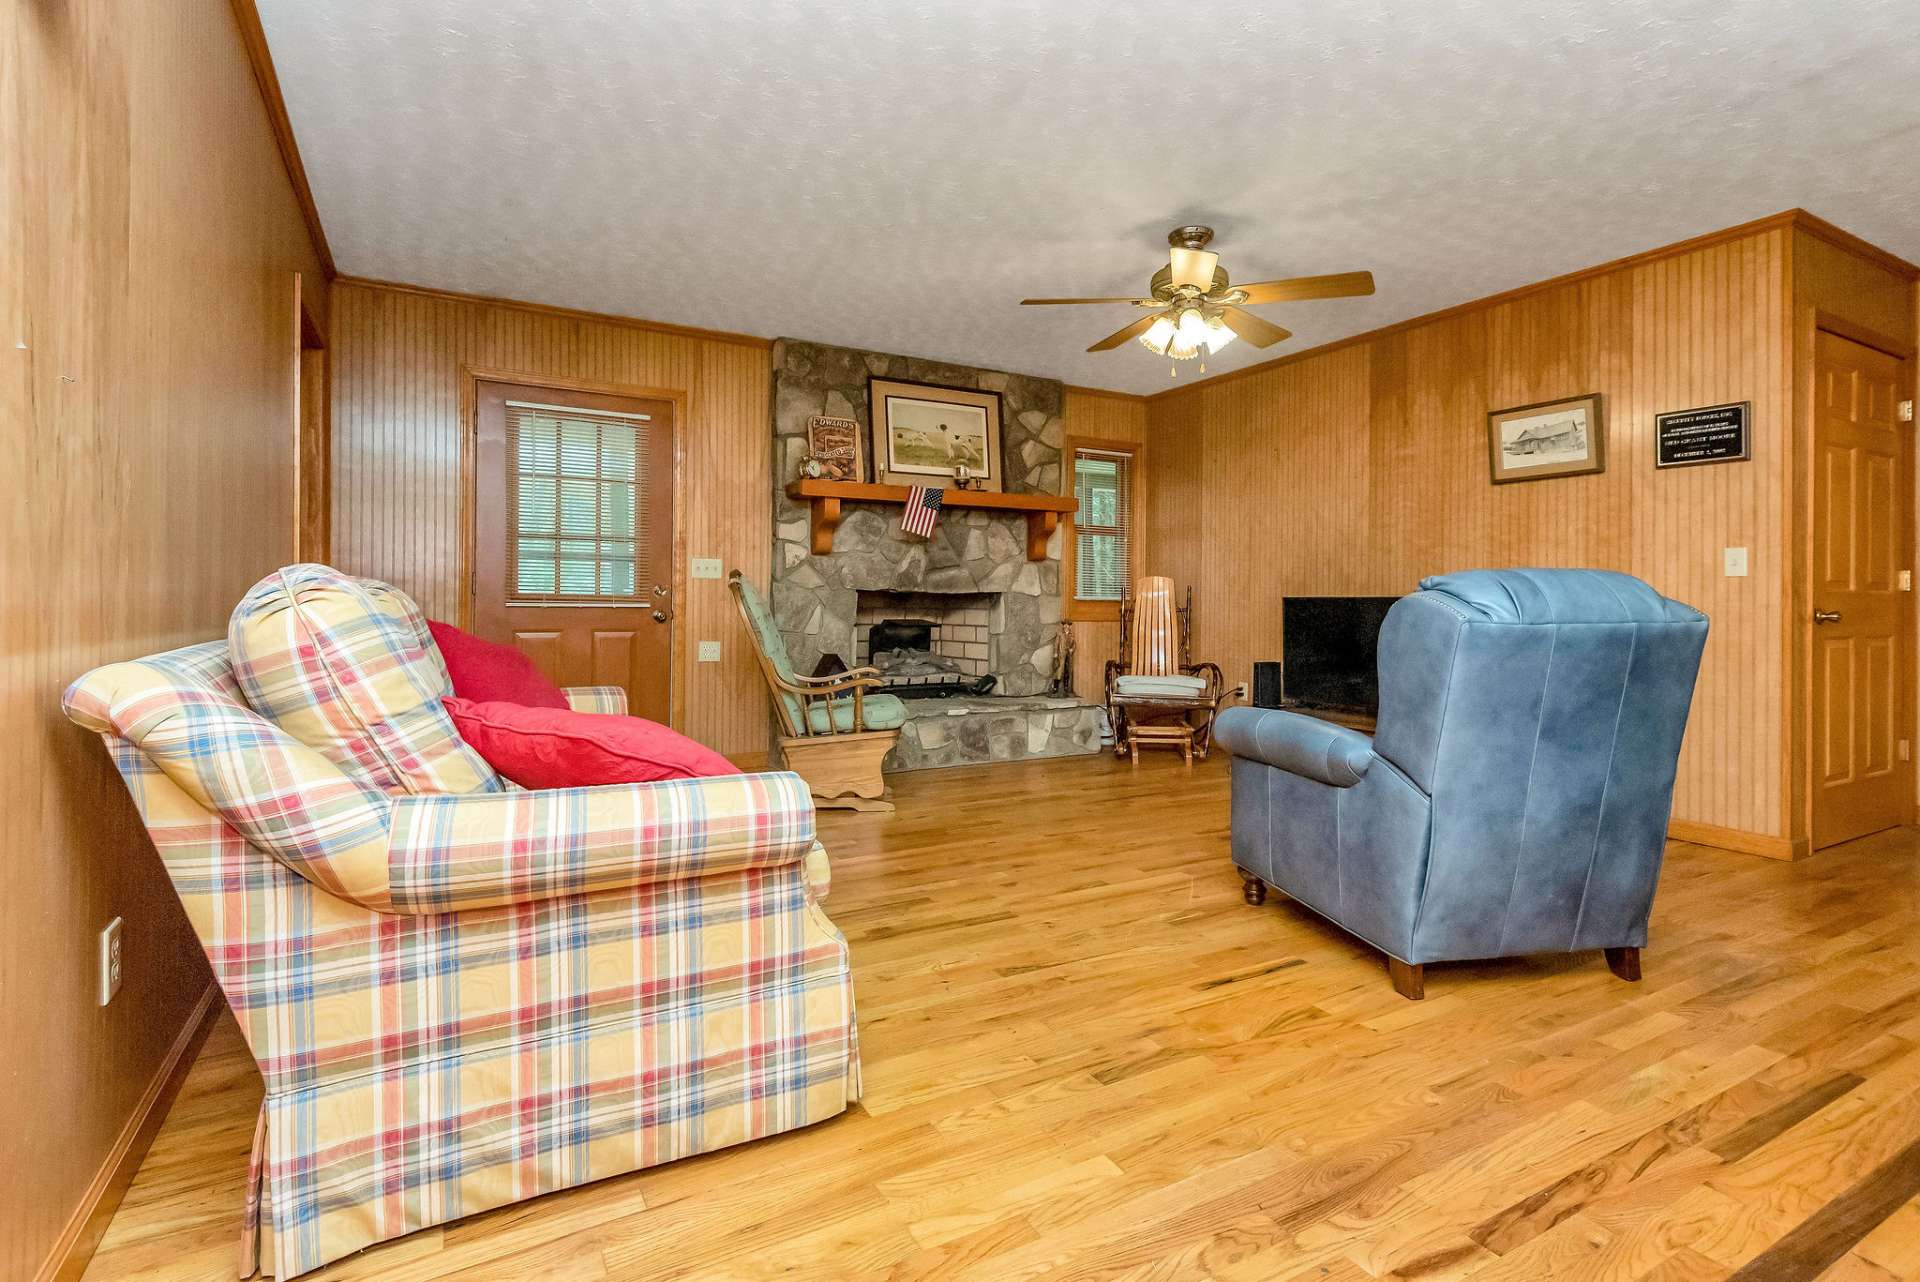 The living area is open to the kitchen and offers a stone fireplace and hardwood floors.